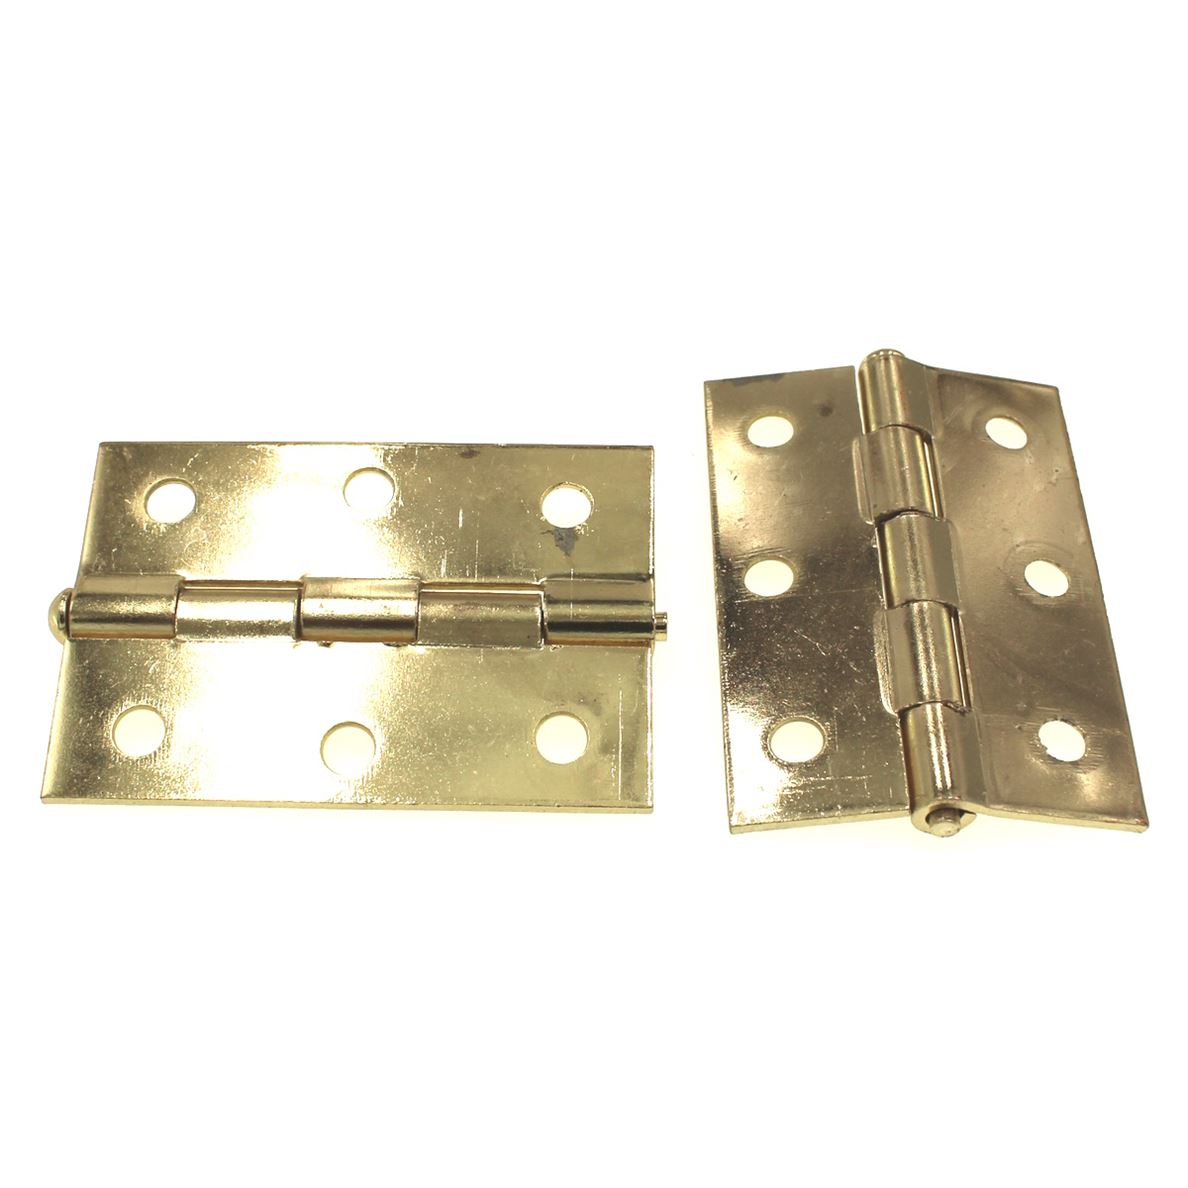 Lawrence Brothers 2 1/2" x 1 3/4" Loose Pin Narrow Hinges 2 Pack D820S-BB